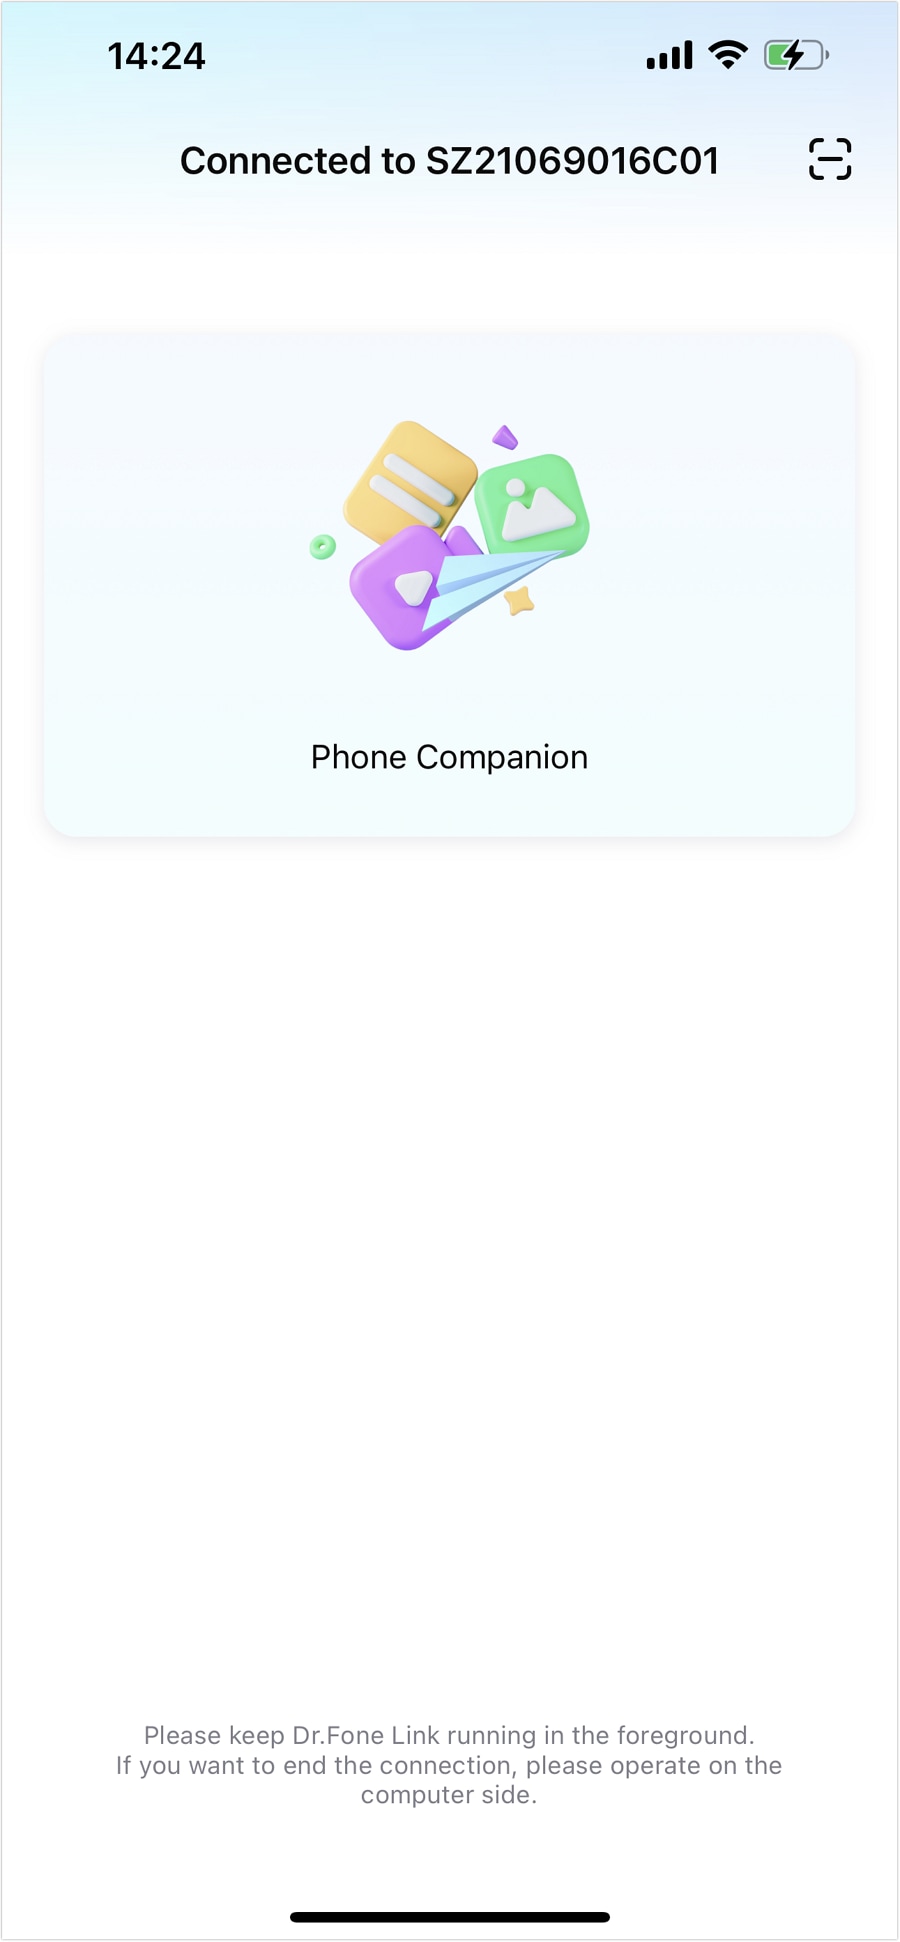  phone companion feature displayed